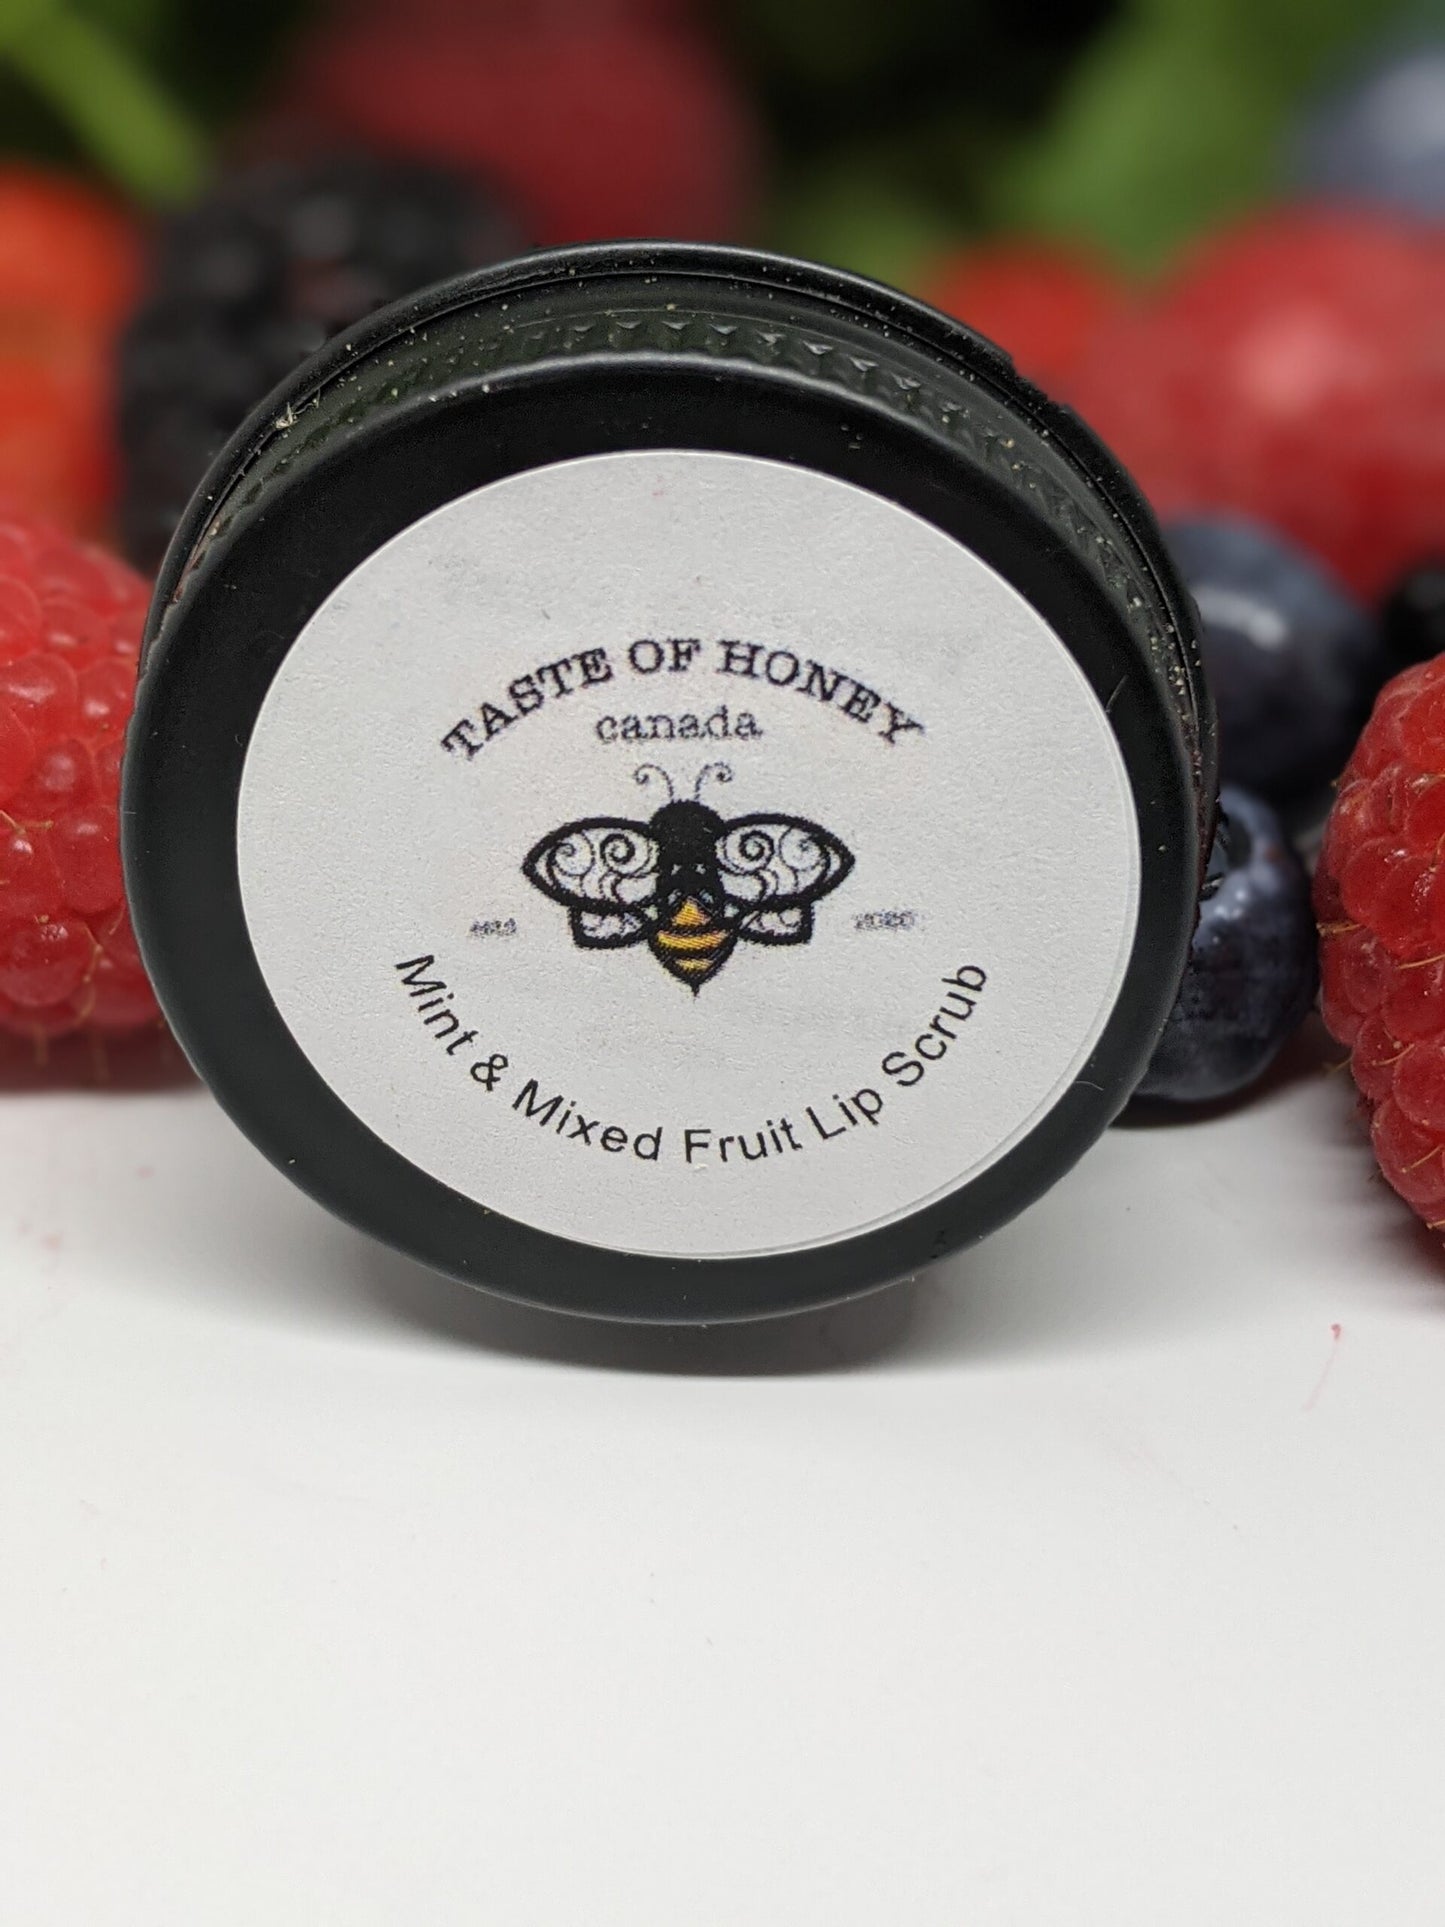 Mint and Mixed Fruit Lip Scrub 1oz or 28g